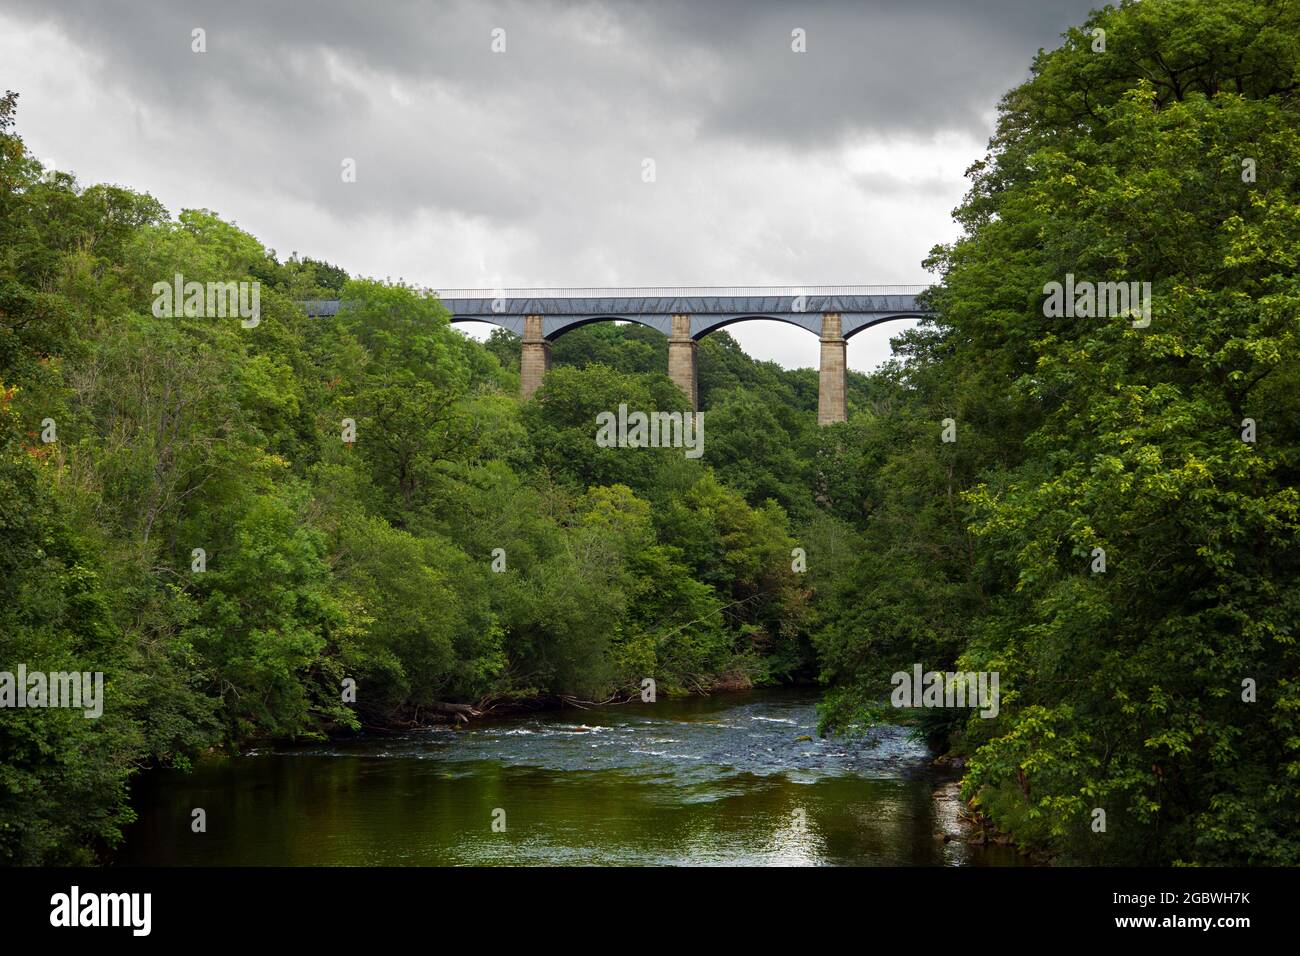 Pontcysyllte Aqueduct carries the Llangollen Canal across the River Dee in Wales. Thomas Telford helped in its design and it was completed in 1805. Stock Photo